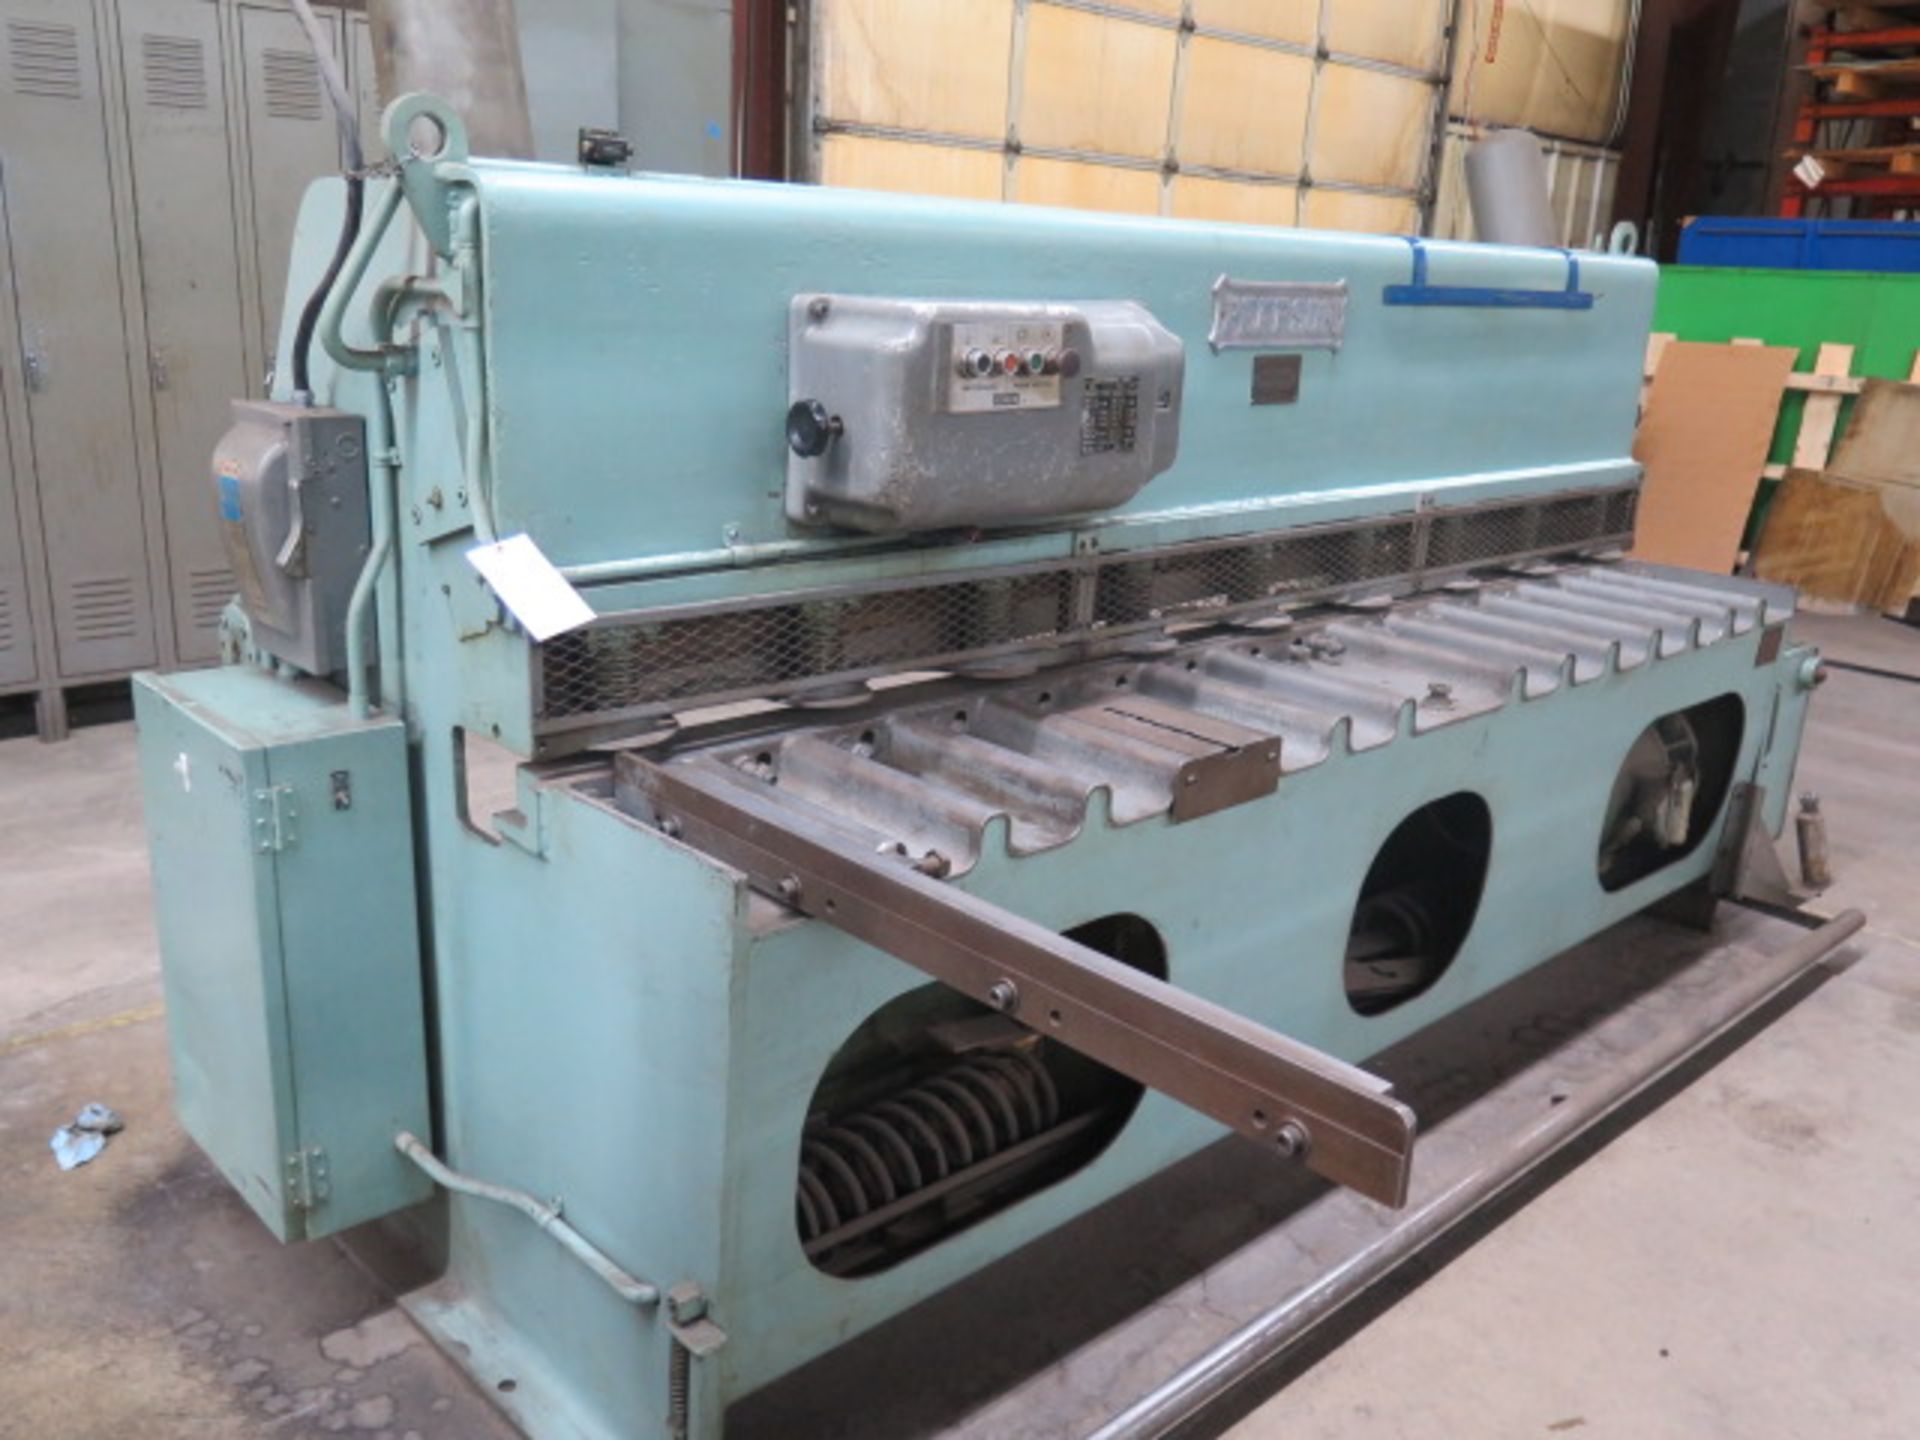 Pearson 8’ x 10GA (1/8”) Power Shear s/n 5104/1 (SOLD AS-IS - NO WARRANTY) - Image 3 of 10